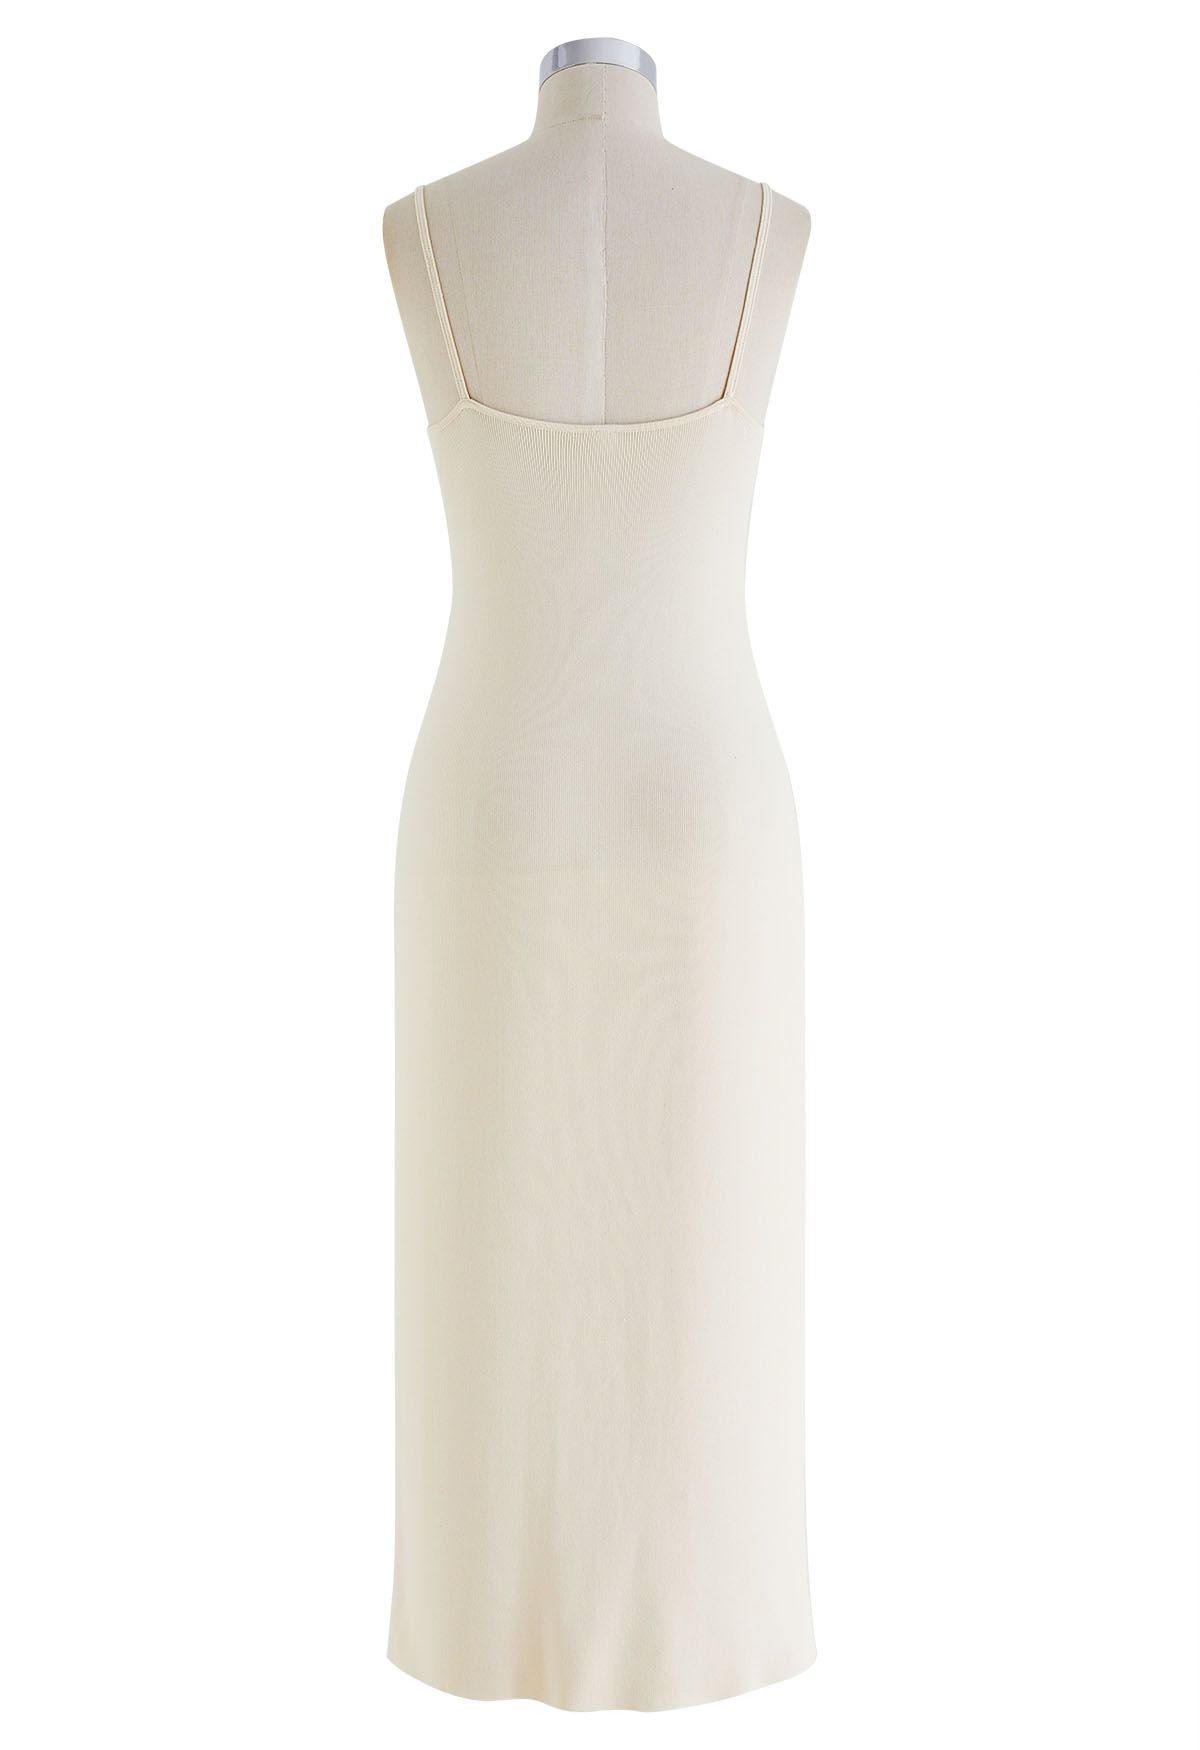 Ode to Simplicity Knit Cami Dress in Ivory